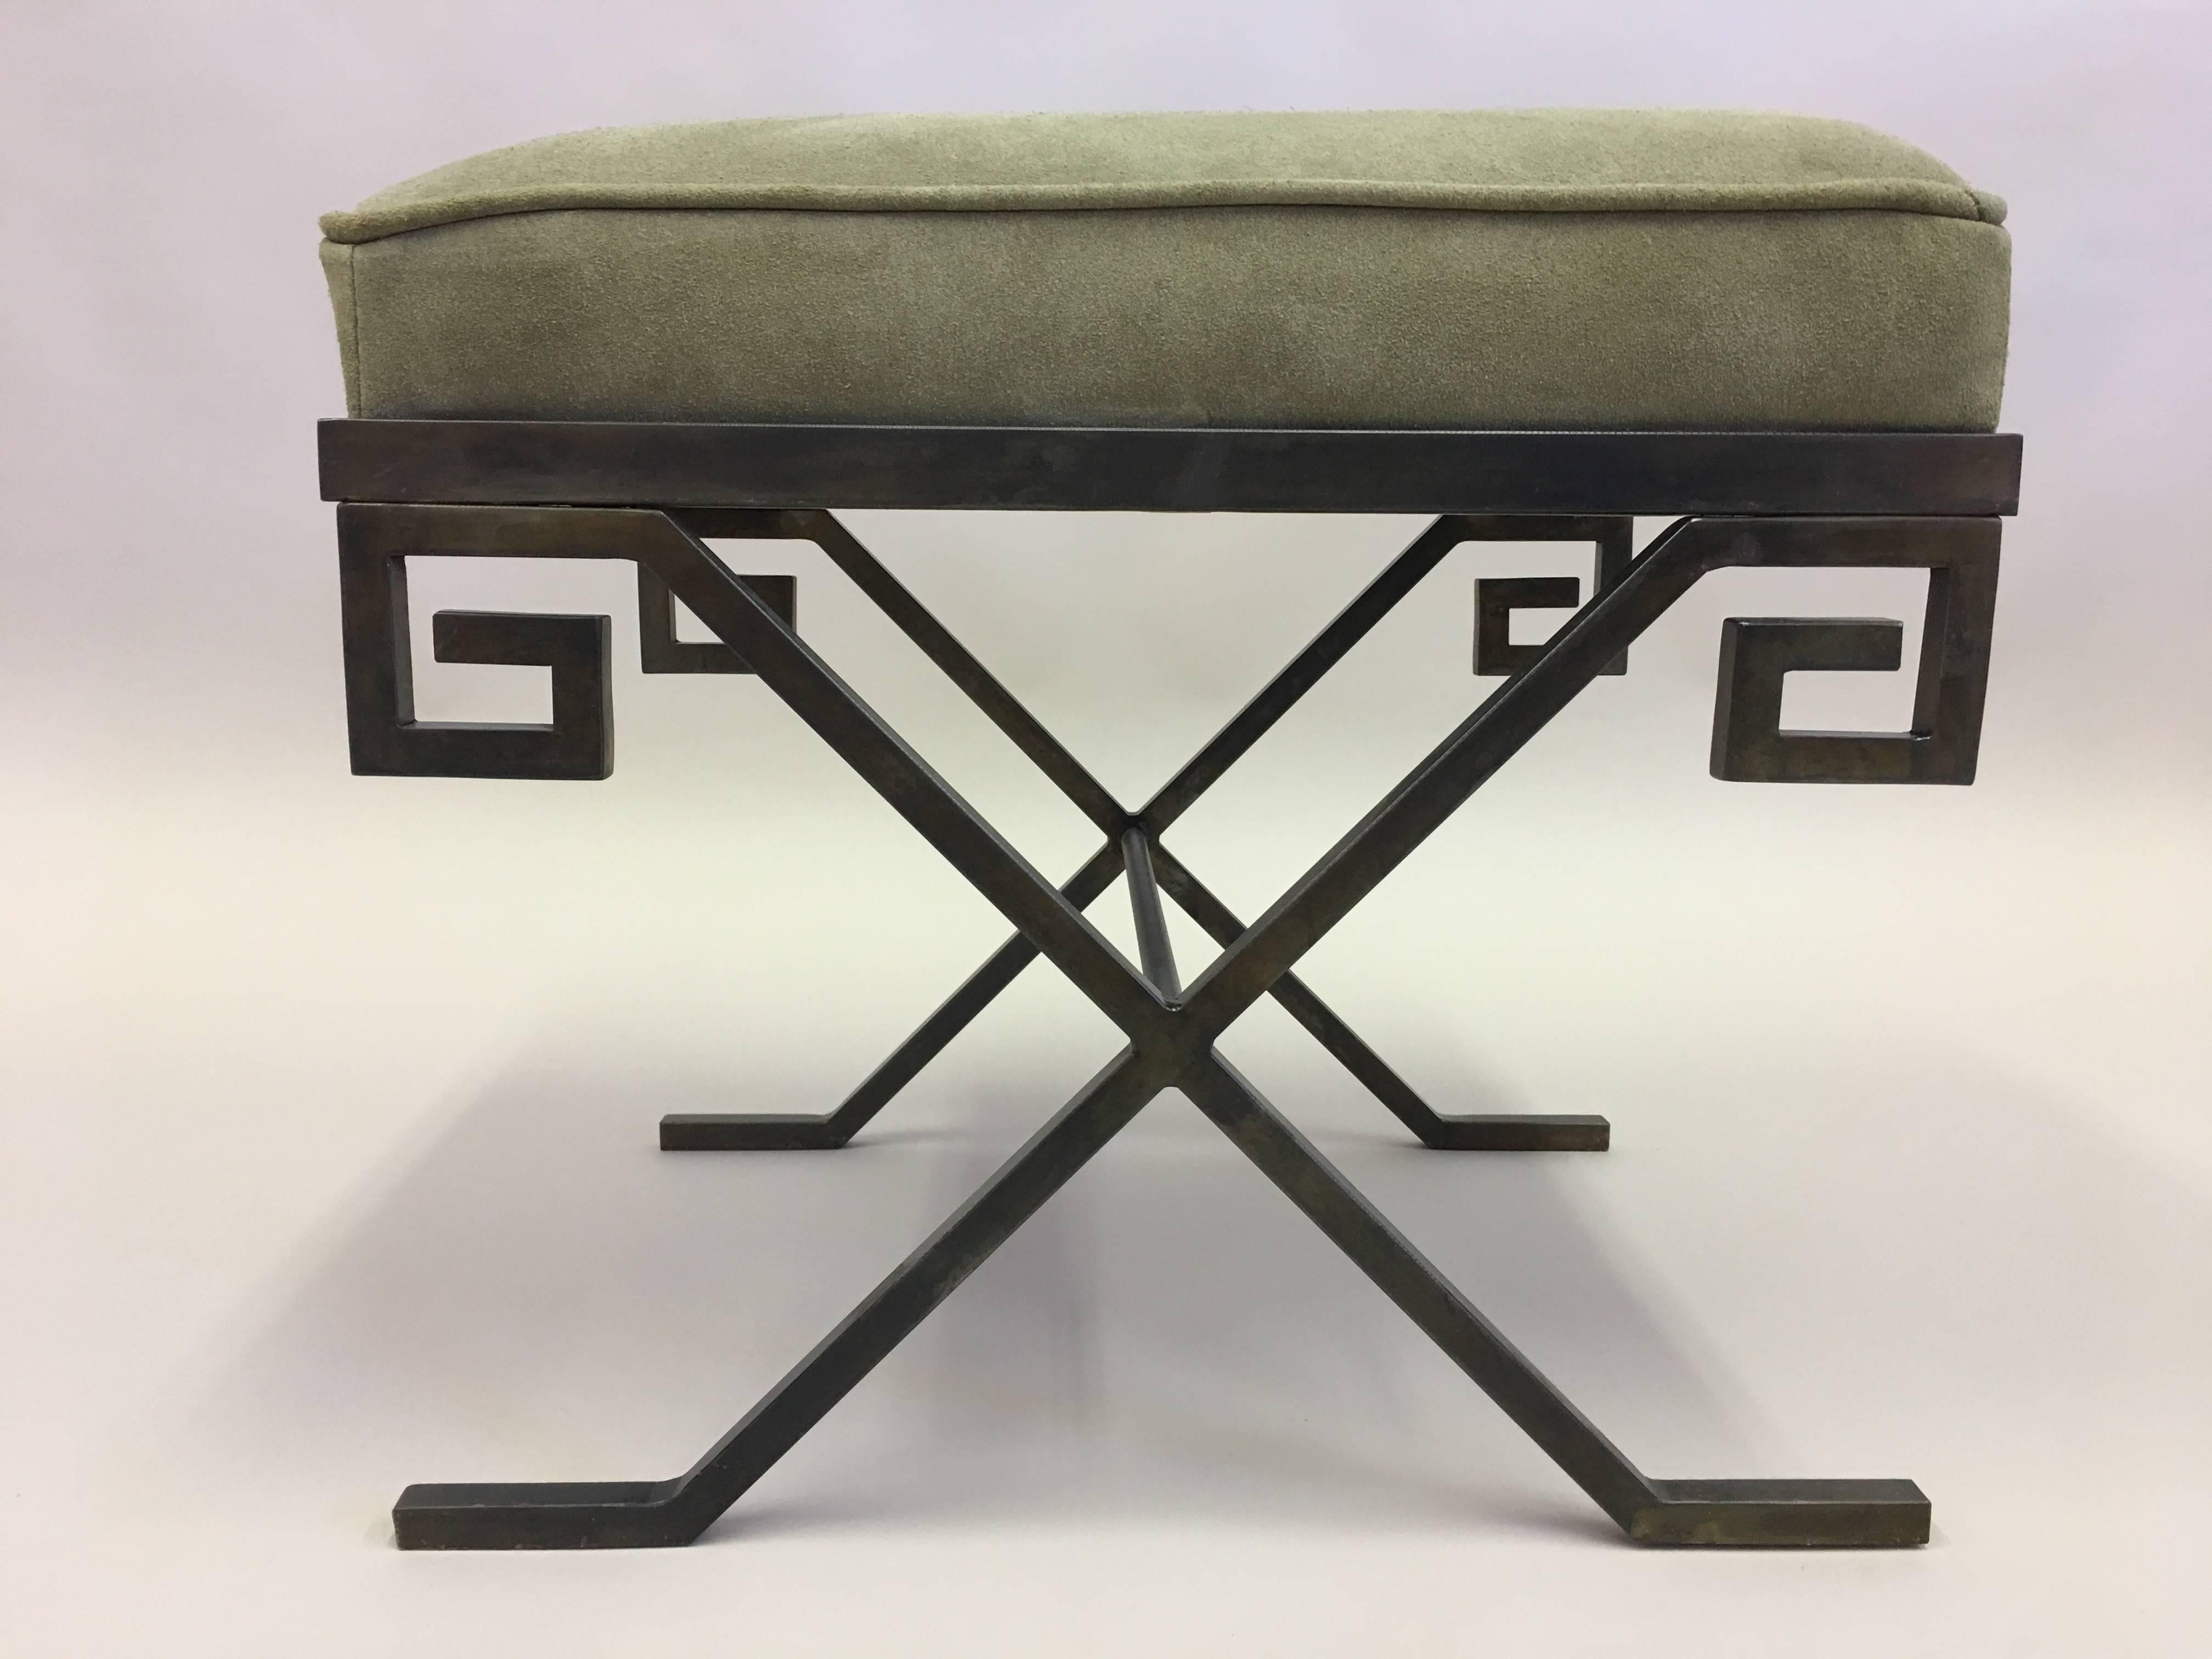 Elegant pair of stools or benches in bronzed wrought iron in the modern neoclassical taste of Jean Michel Frank. The wrought iron frame is in the Classic X-form and the apron is in the form of a Greek key design.

The pieces can be upholstered